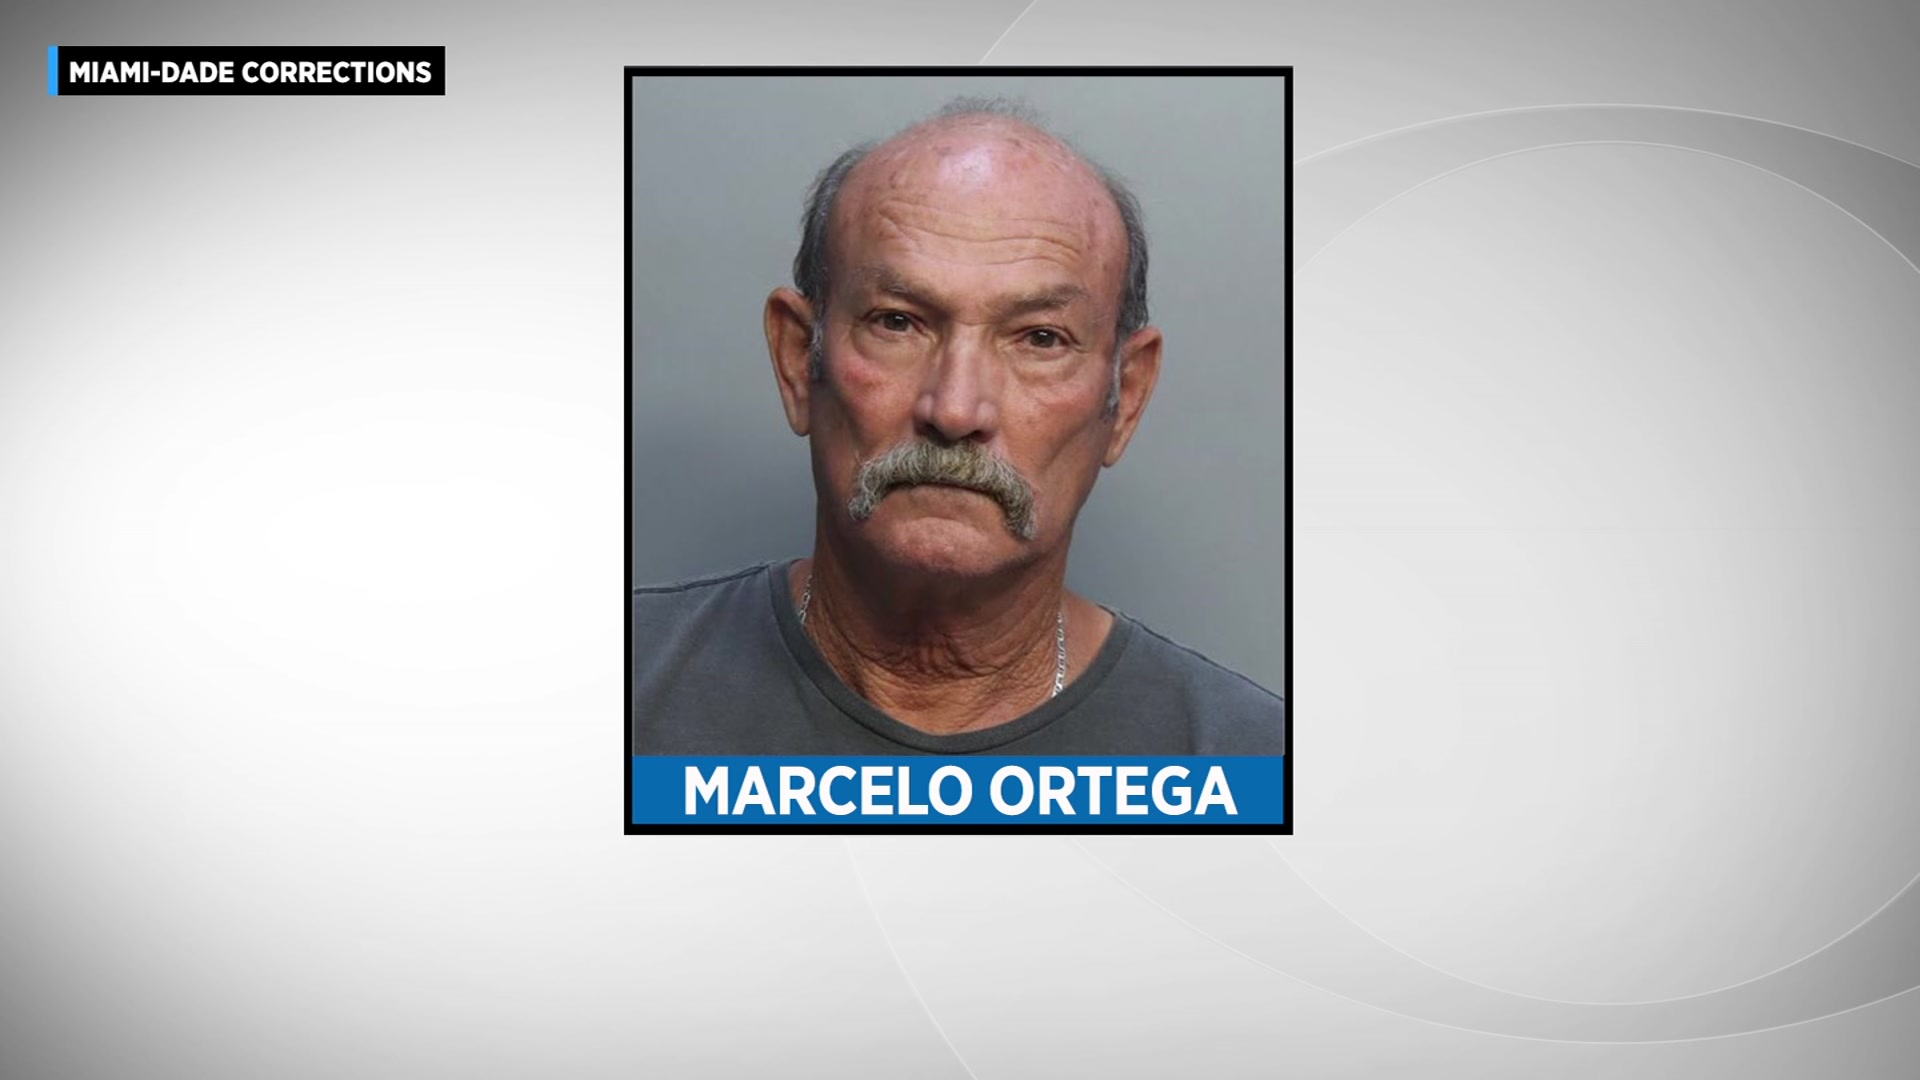 Private Miami-Dade Bus Driver Accused Of Molesting 7-Year-Old Girl